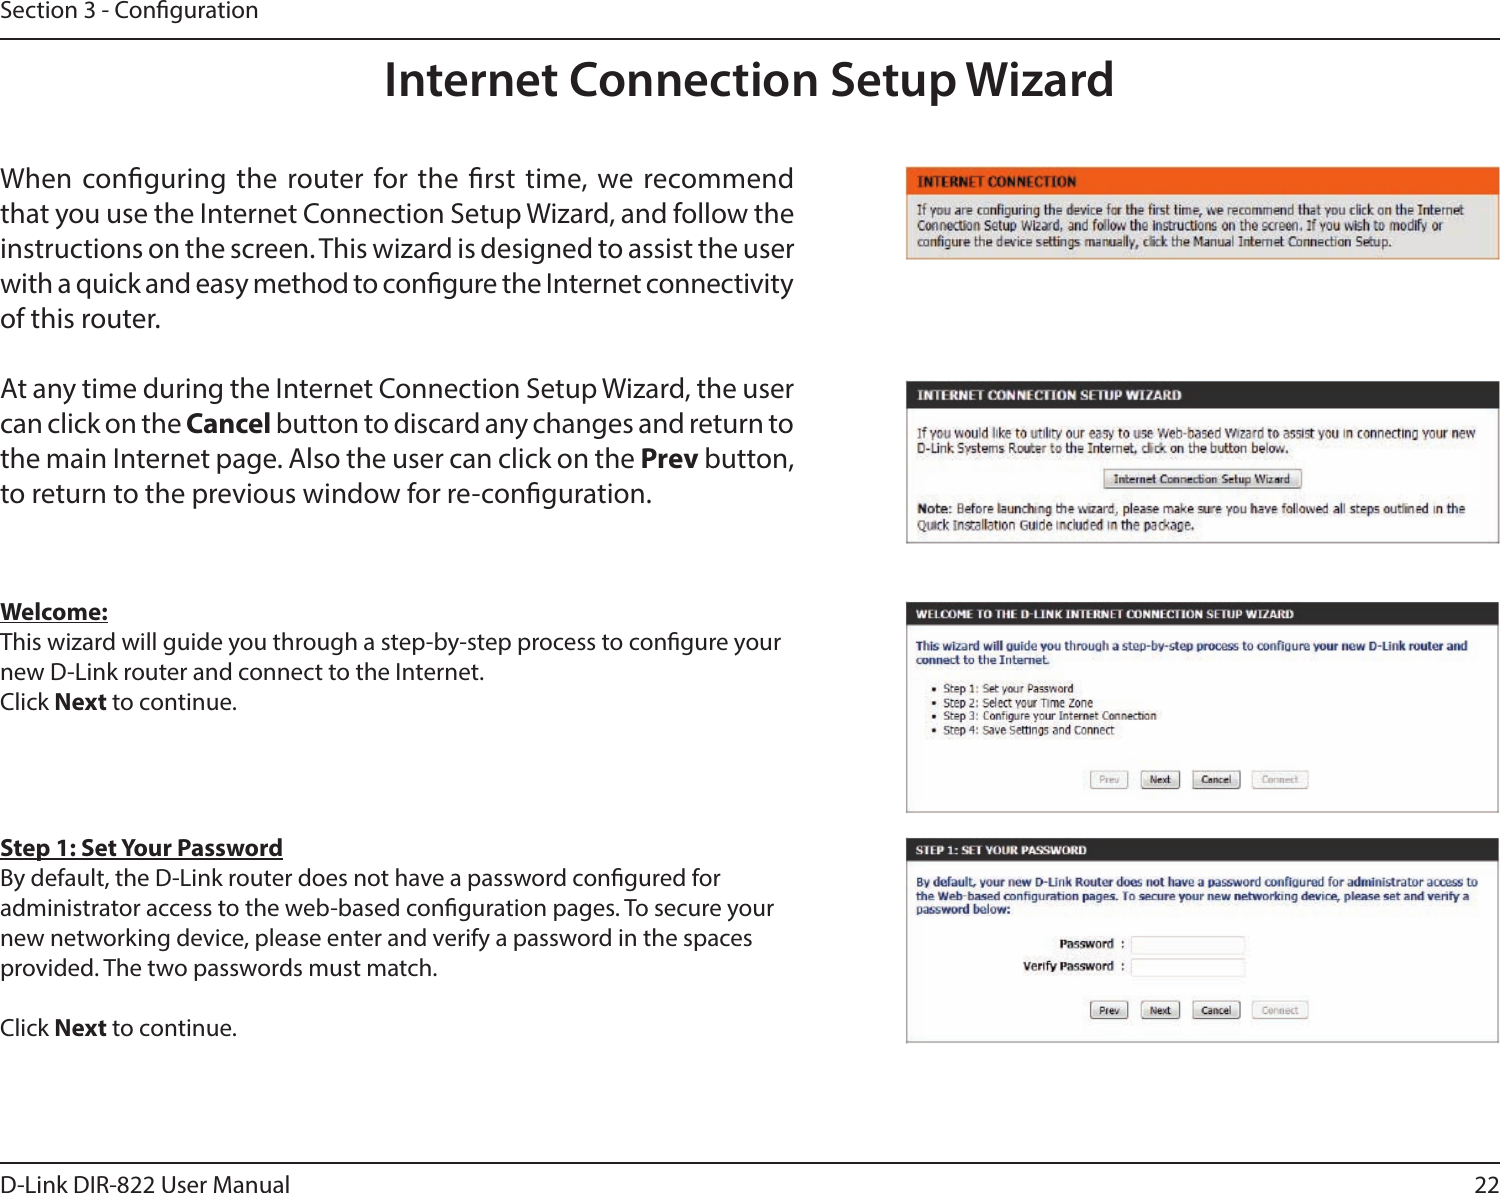 22D-Link DIR-822 User ManualSection 3 - CongurationInternet Connection Setup WizardWhen conguring the router for the rst time, we recommend that you use the Internet Connection Setup Wizard, and follow the instructions on the screen. This wizard is designed to assist the user with a quick and easy method to congure the Internet connectivity of this router.At any time during the Internet Connection Setup Wizard, the user can click on the Cancel button to discard any changes and return to the main Internet page. Also the user can click on the Prev button, to return to the previous window for re-conguration.Welcome:This wizard will guide you through a step-by-step process to congure your new D-Link router and connect to the Internet. Click Next to continue.Step 1: Set Your PasswordBy default, the D-Link router does not have a password congured for administrator access to the web-based conguration pages. To secure your new networking device, please enter and verify a password in the spaces provided. The two passwords must match.Click Next to continue.